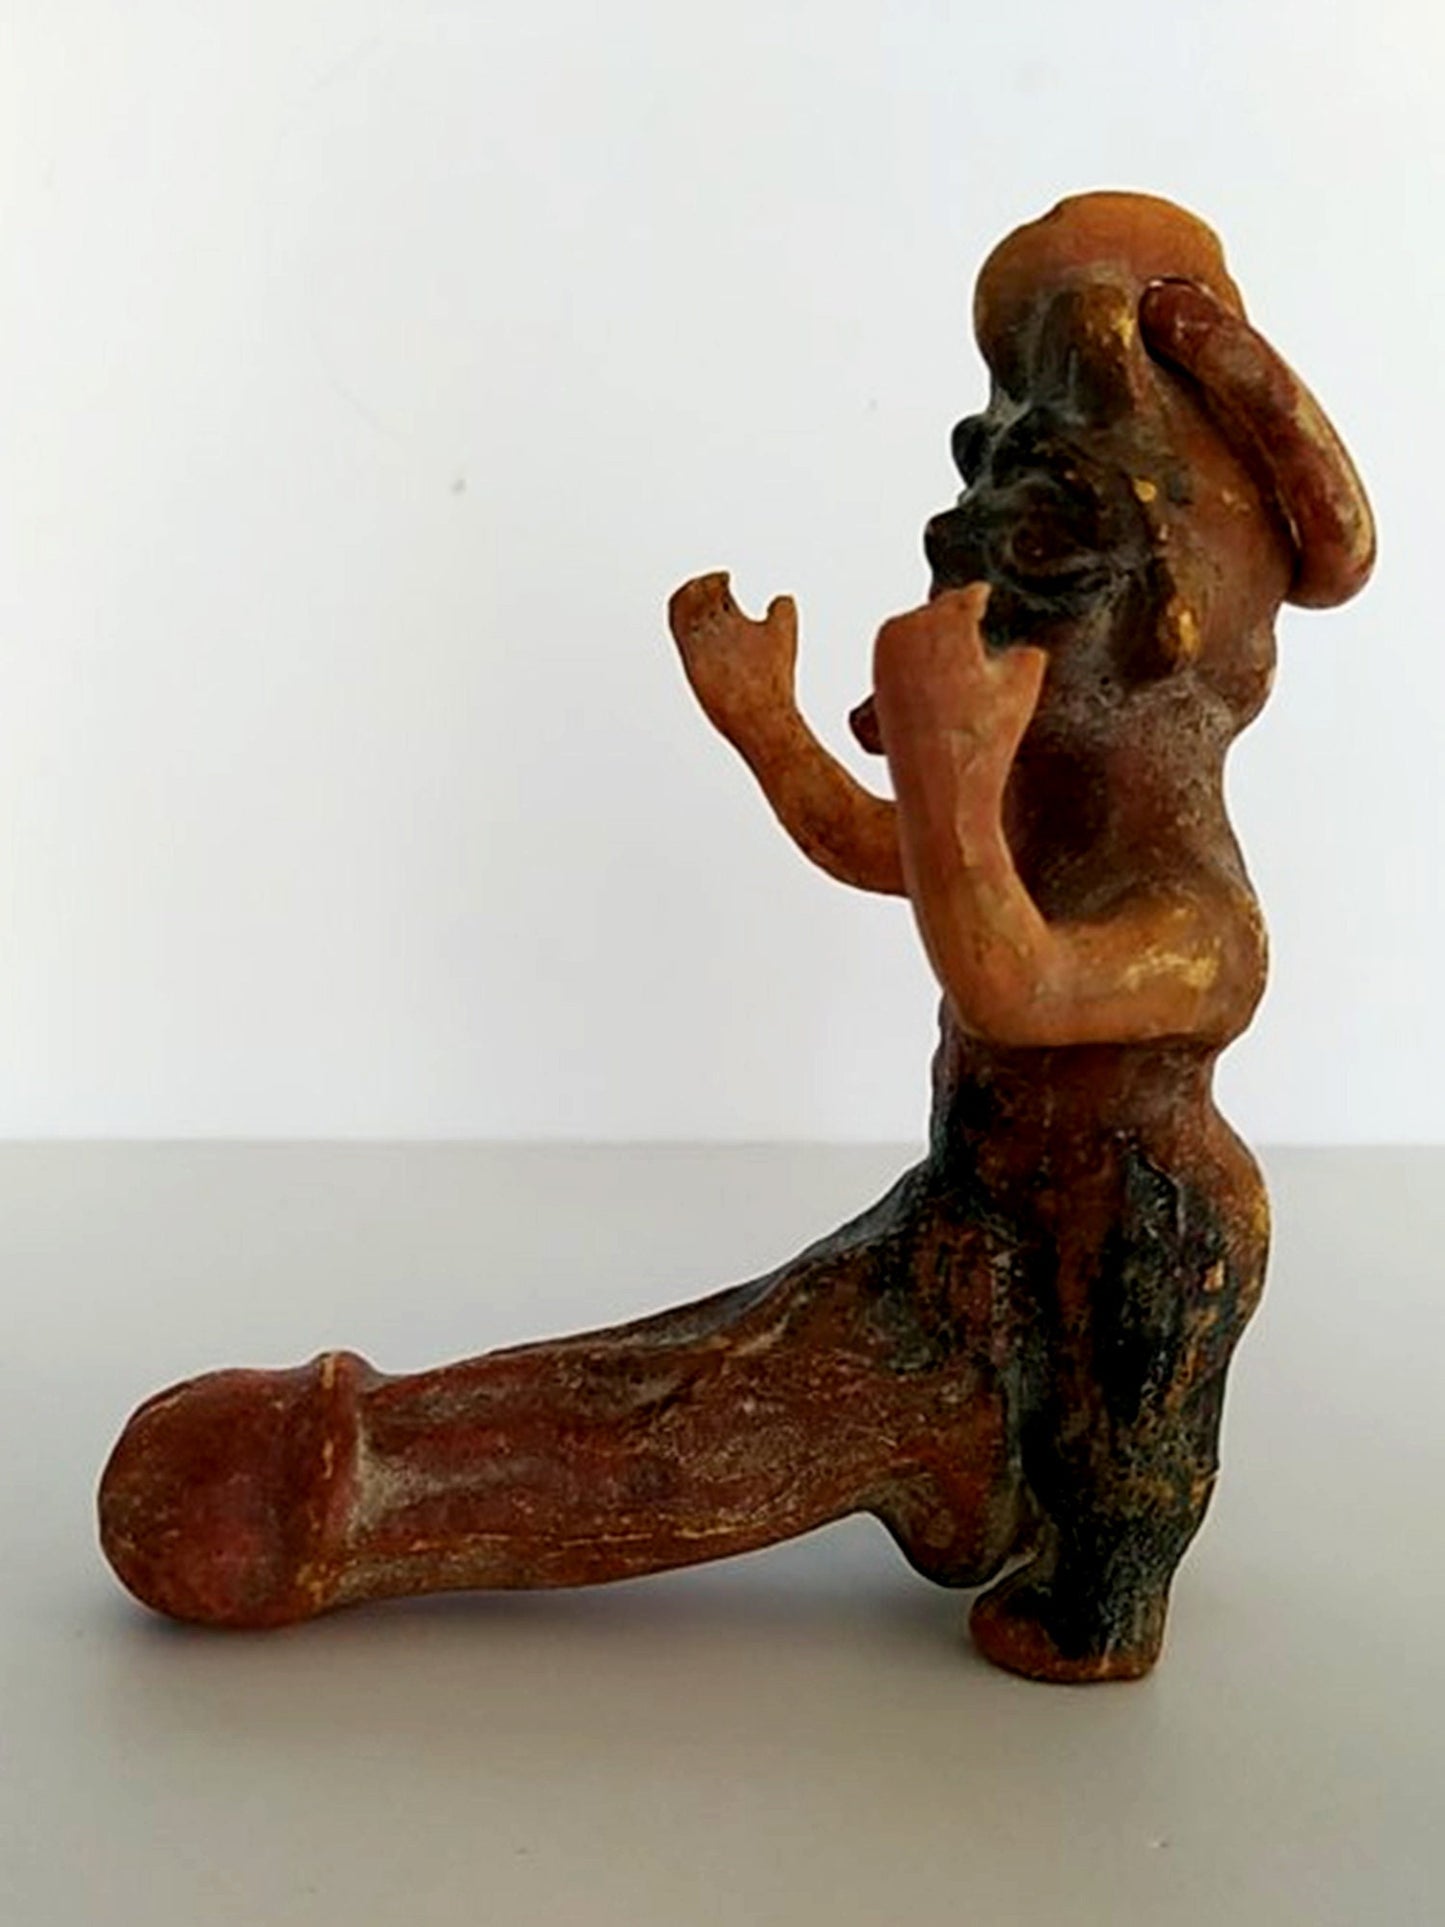 Pottery oil lamp in the shape of a satyr with an enormous phallus - Pompeii, 1st century A.D. - Museum Reproduction - Ceramic Artifact